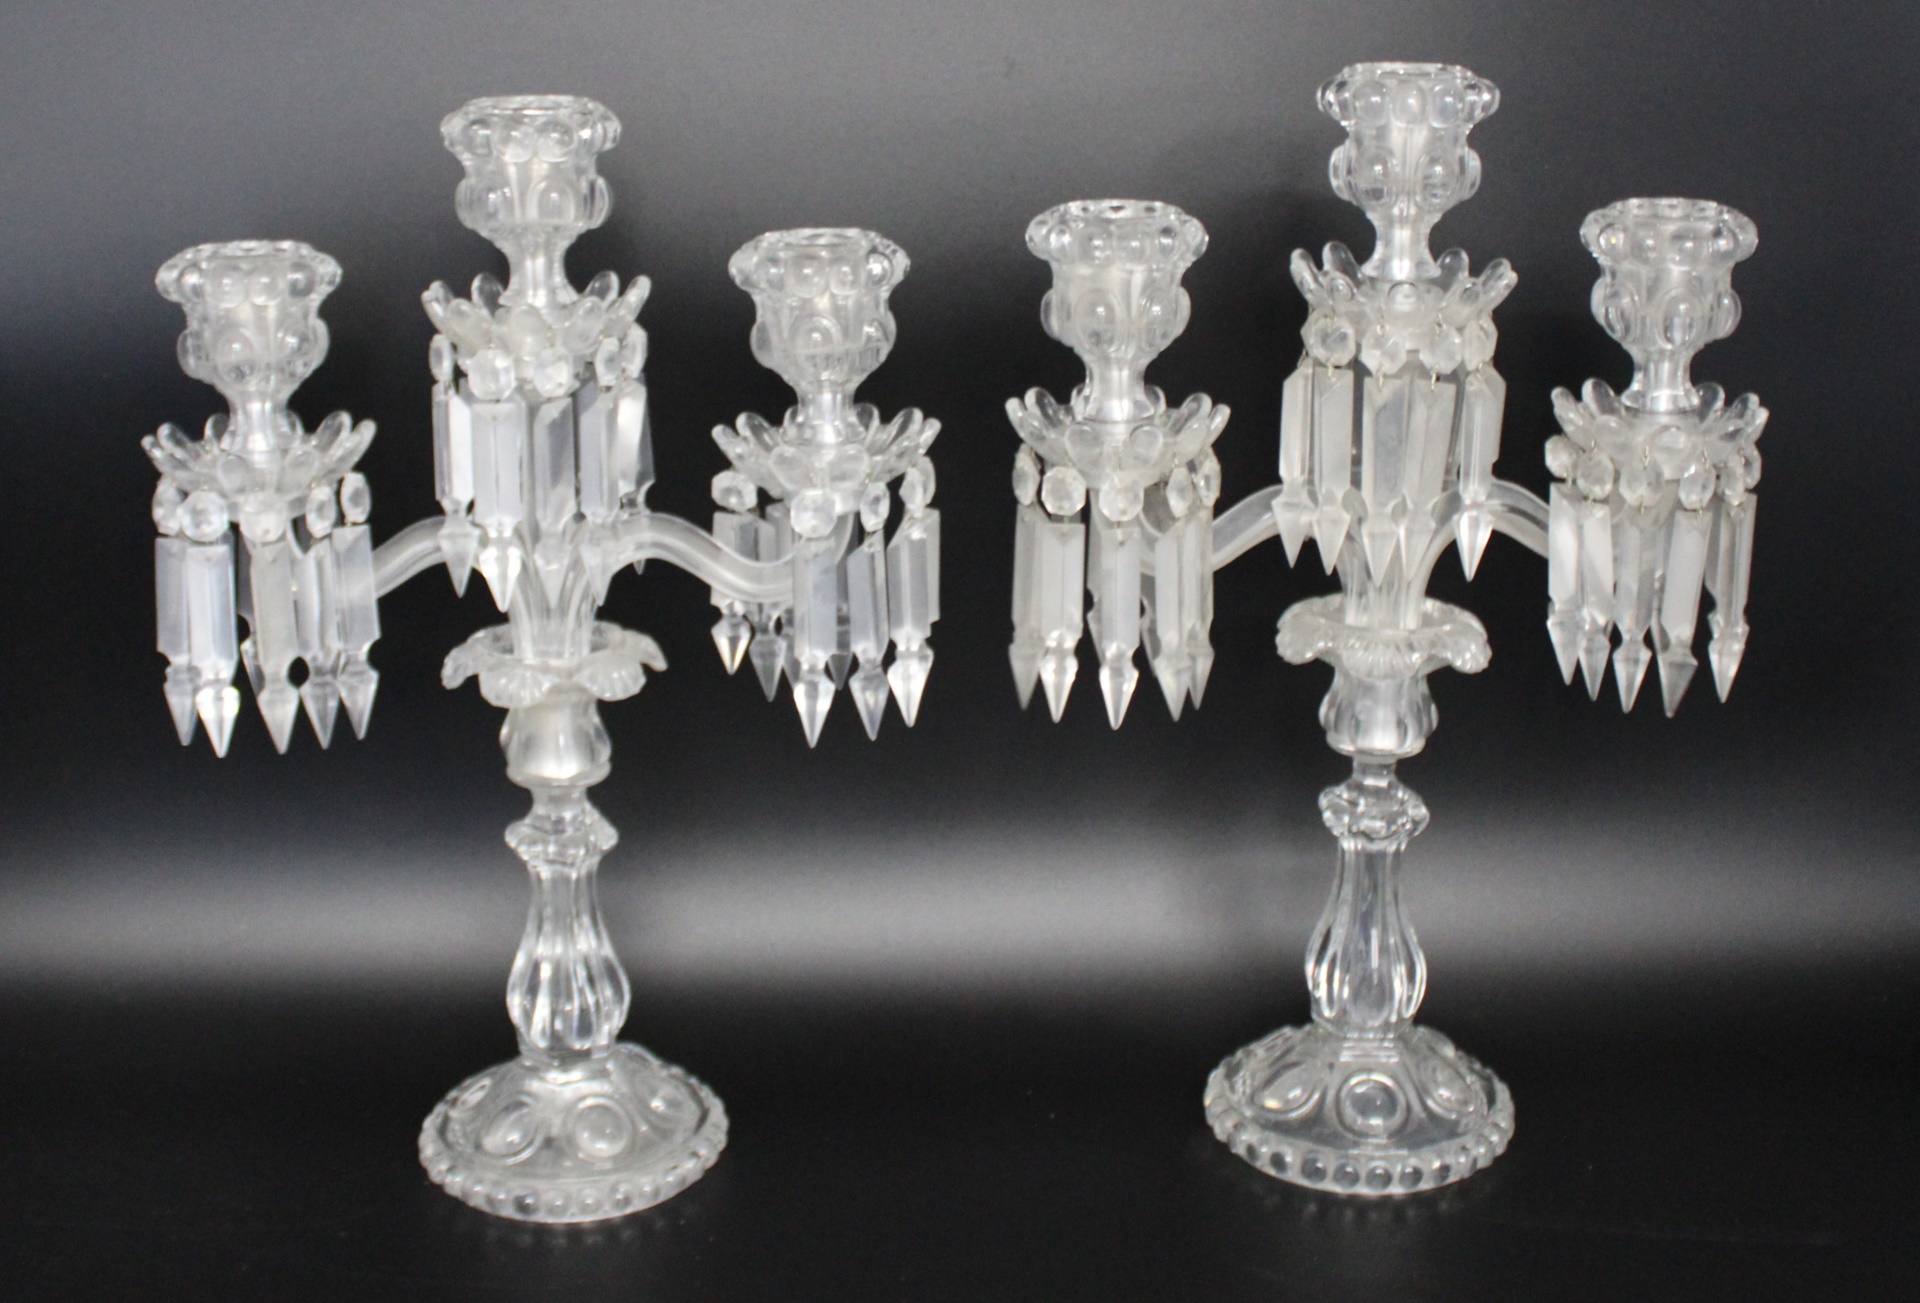 PAIR OF ANTIQUE BACCARAT GLASS